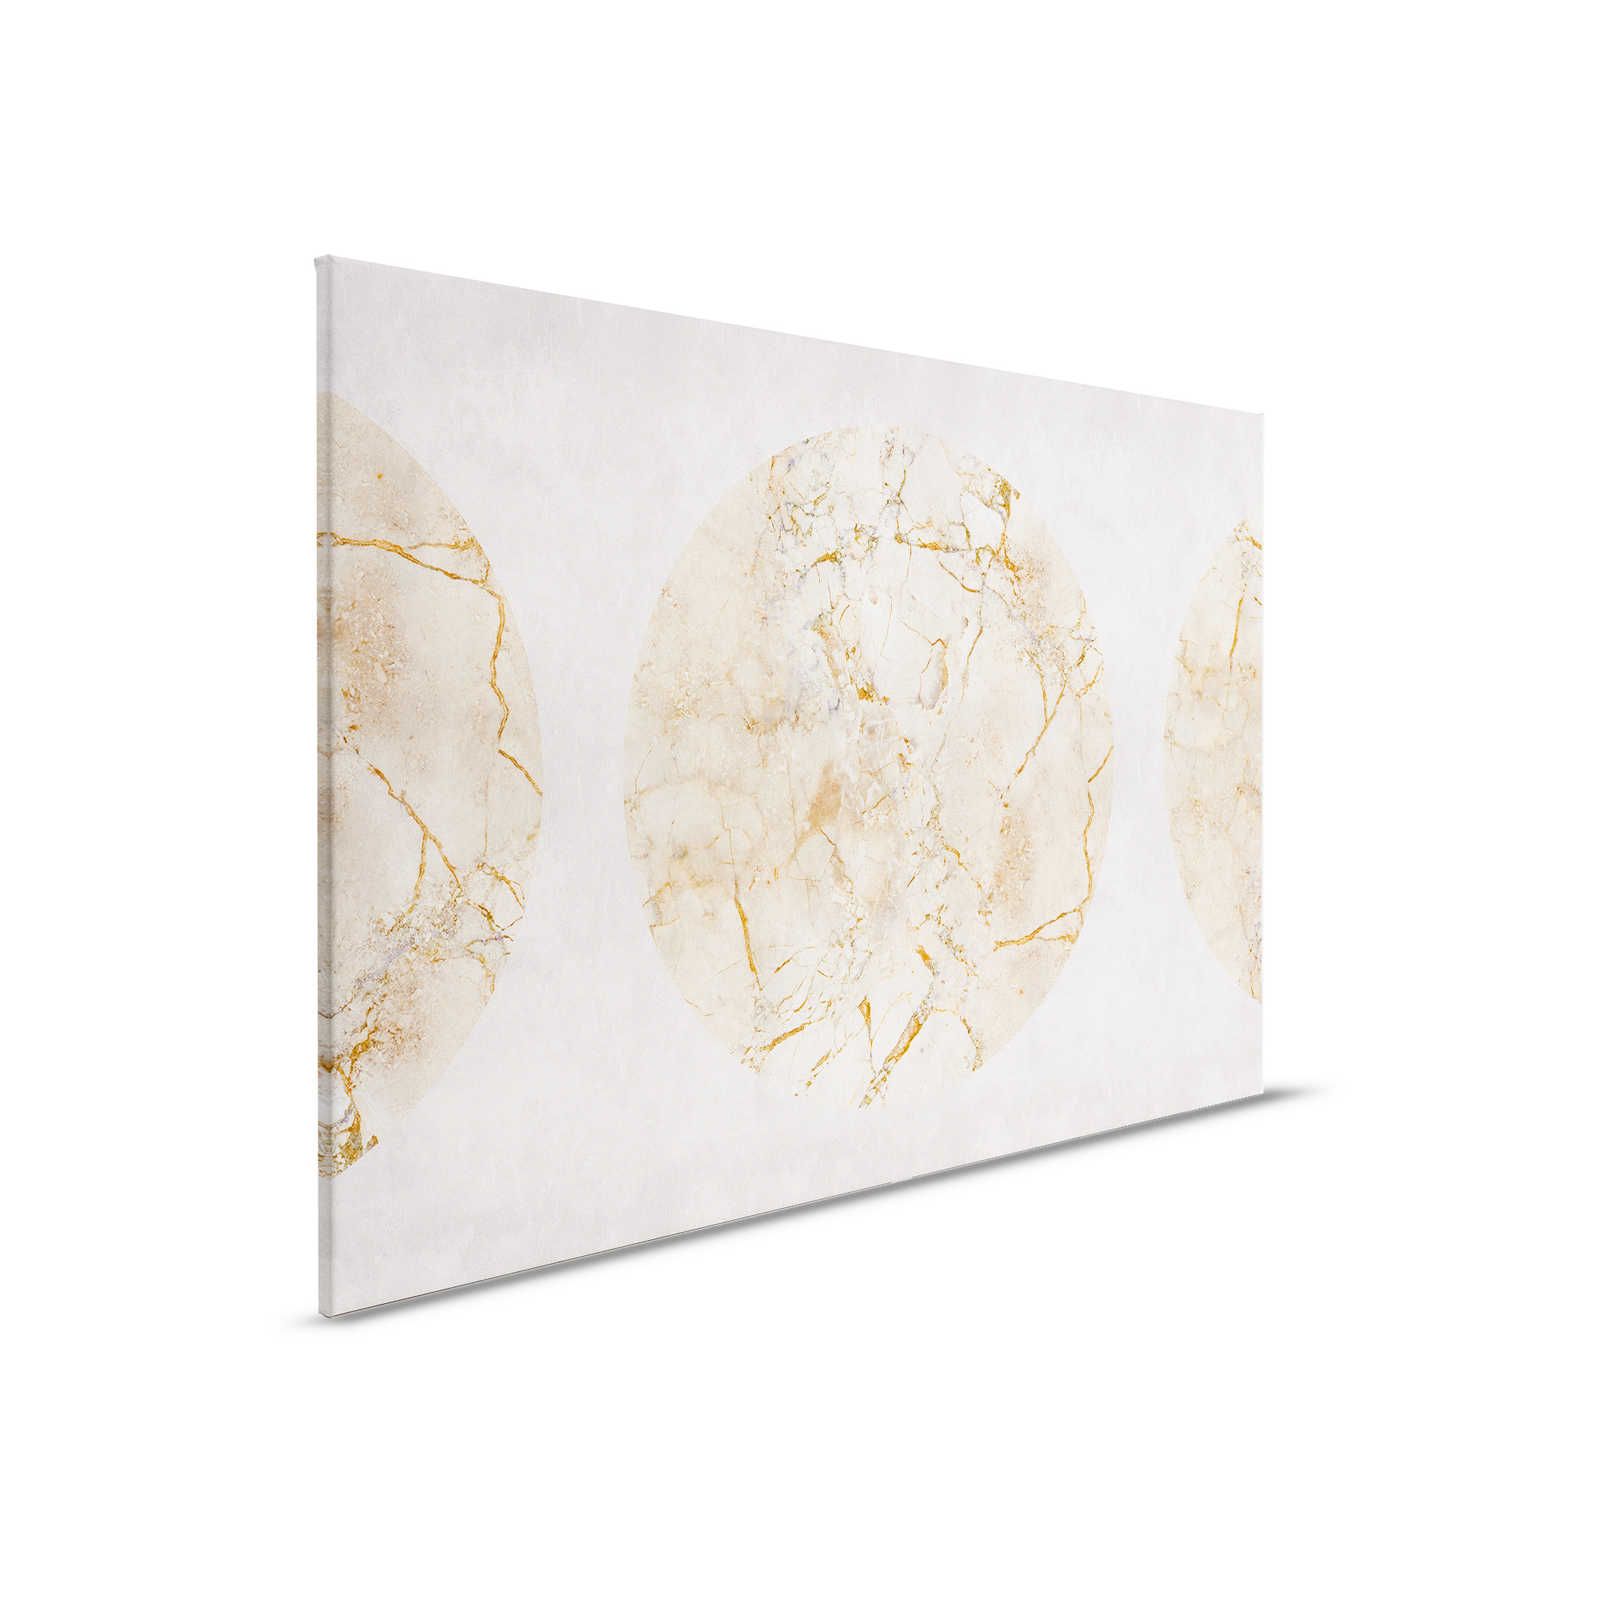         Venus 1 - Canvas painting golden marble with circle motif & plaster look - 0.90 m x 0.60 m
    